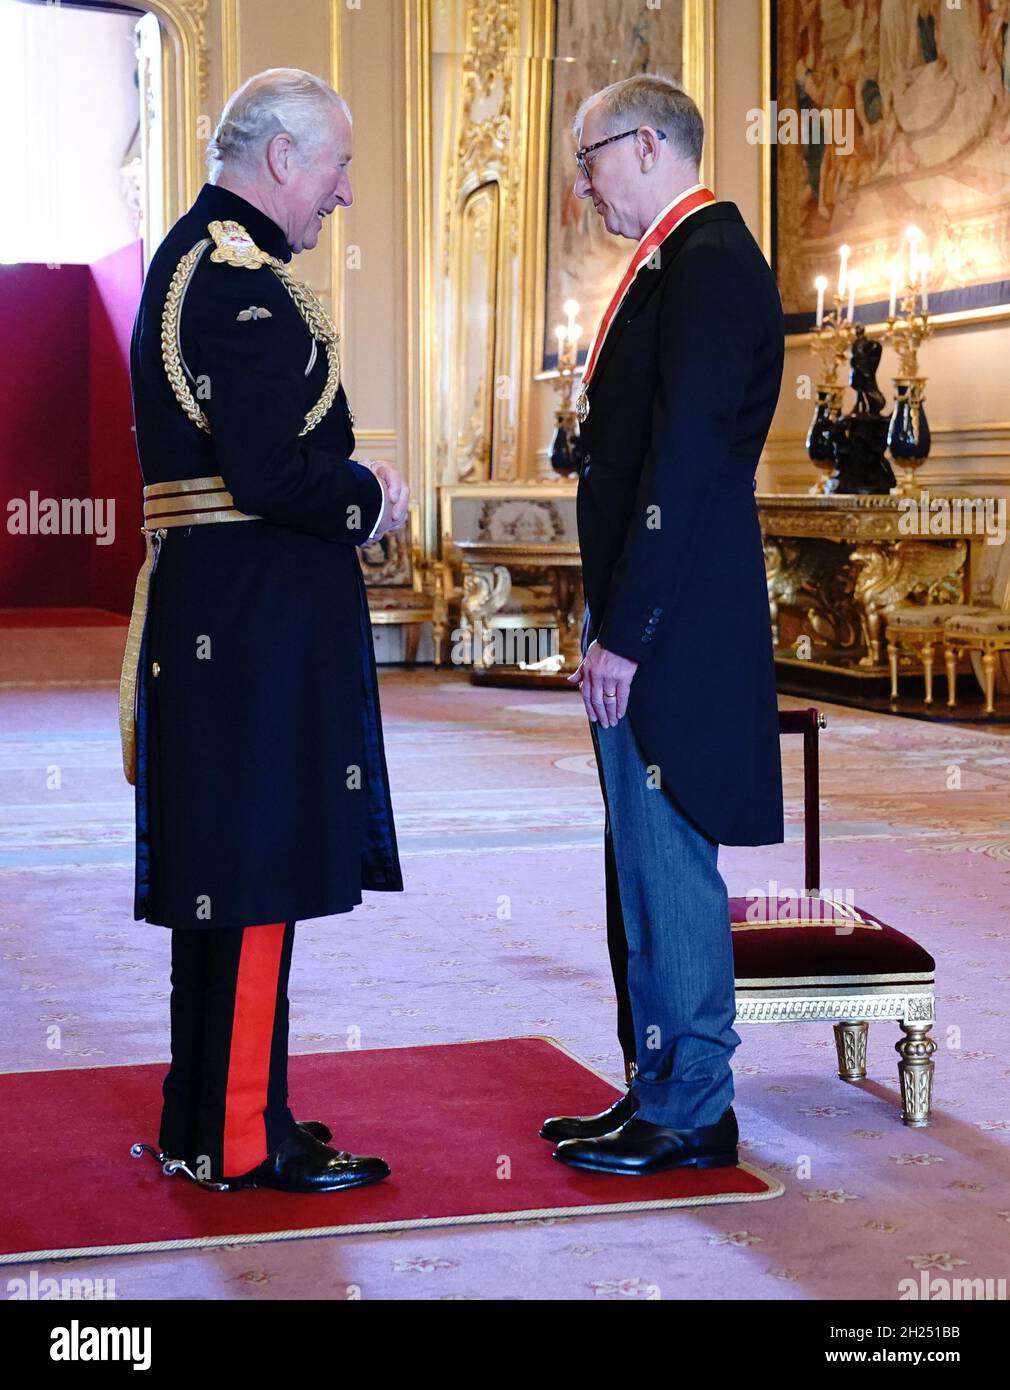 Sir Philip May, the husband of former prime minister Theresa May, is knighted for political service by the Prince of Wales during an investiture ceremony at Windsor Castle. Picture date: Wednesday October 20, 2021. Stock Photo